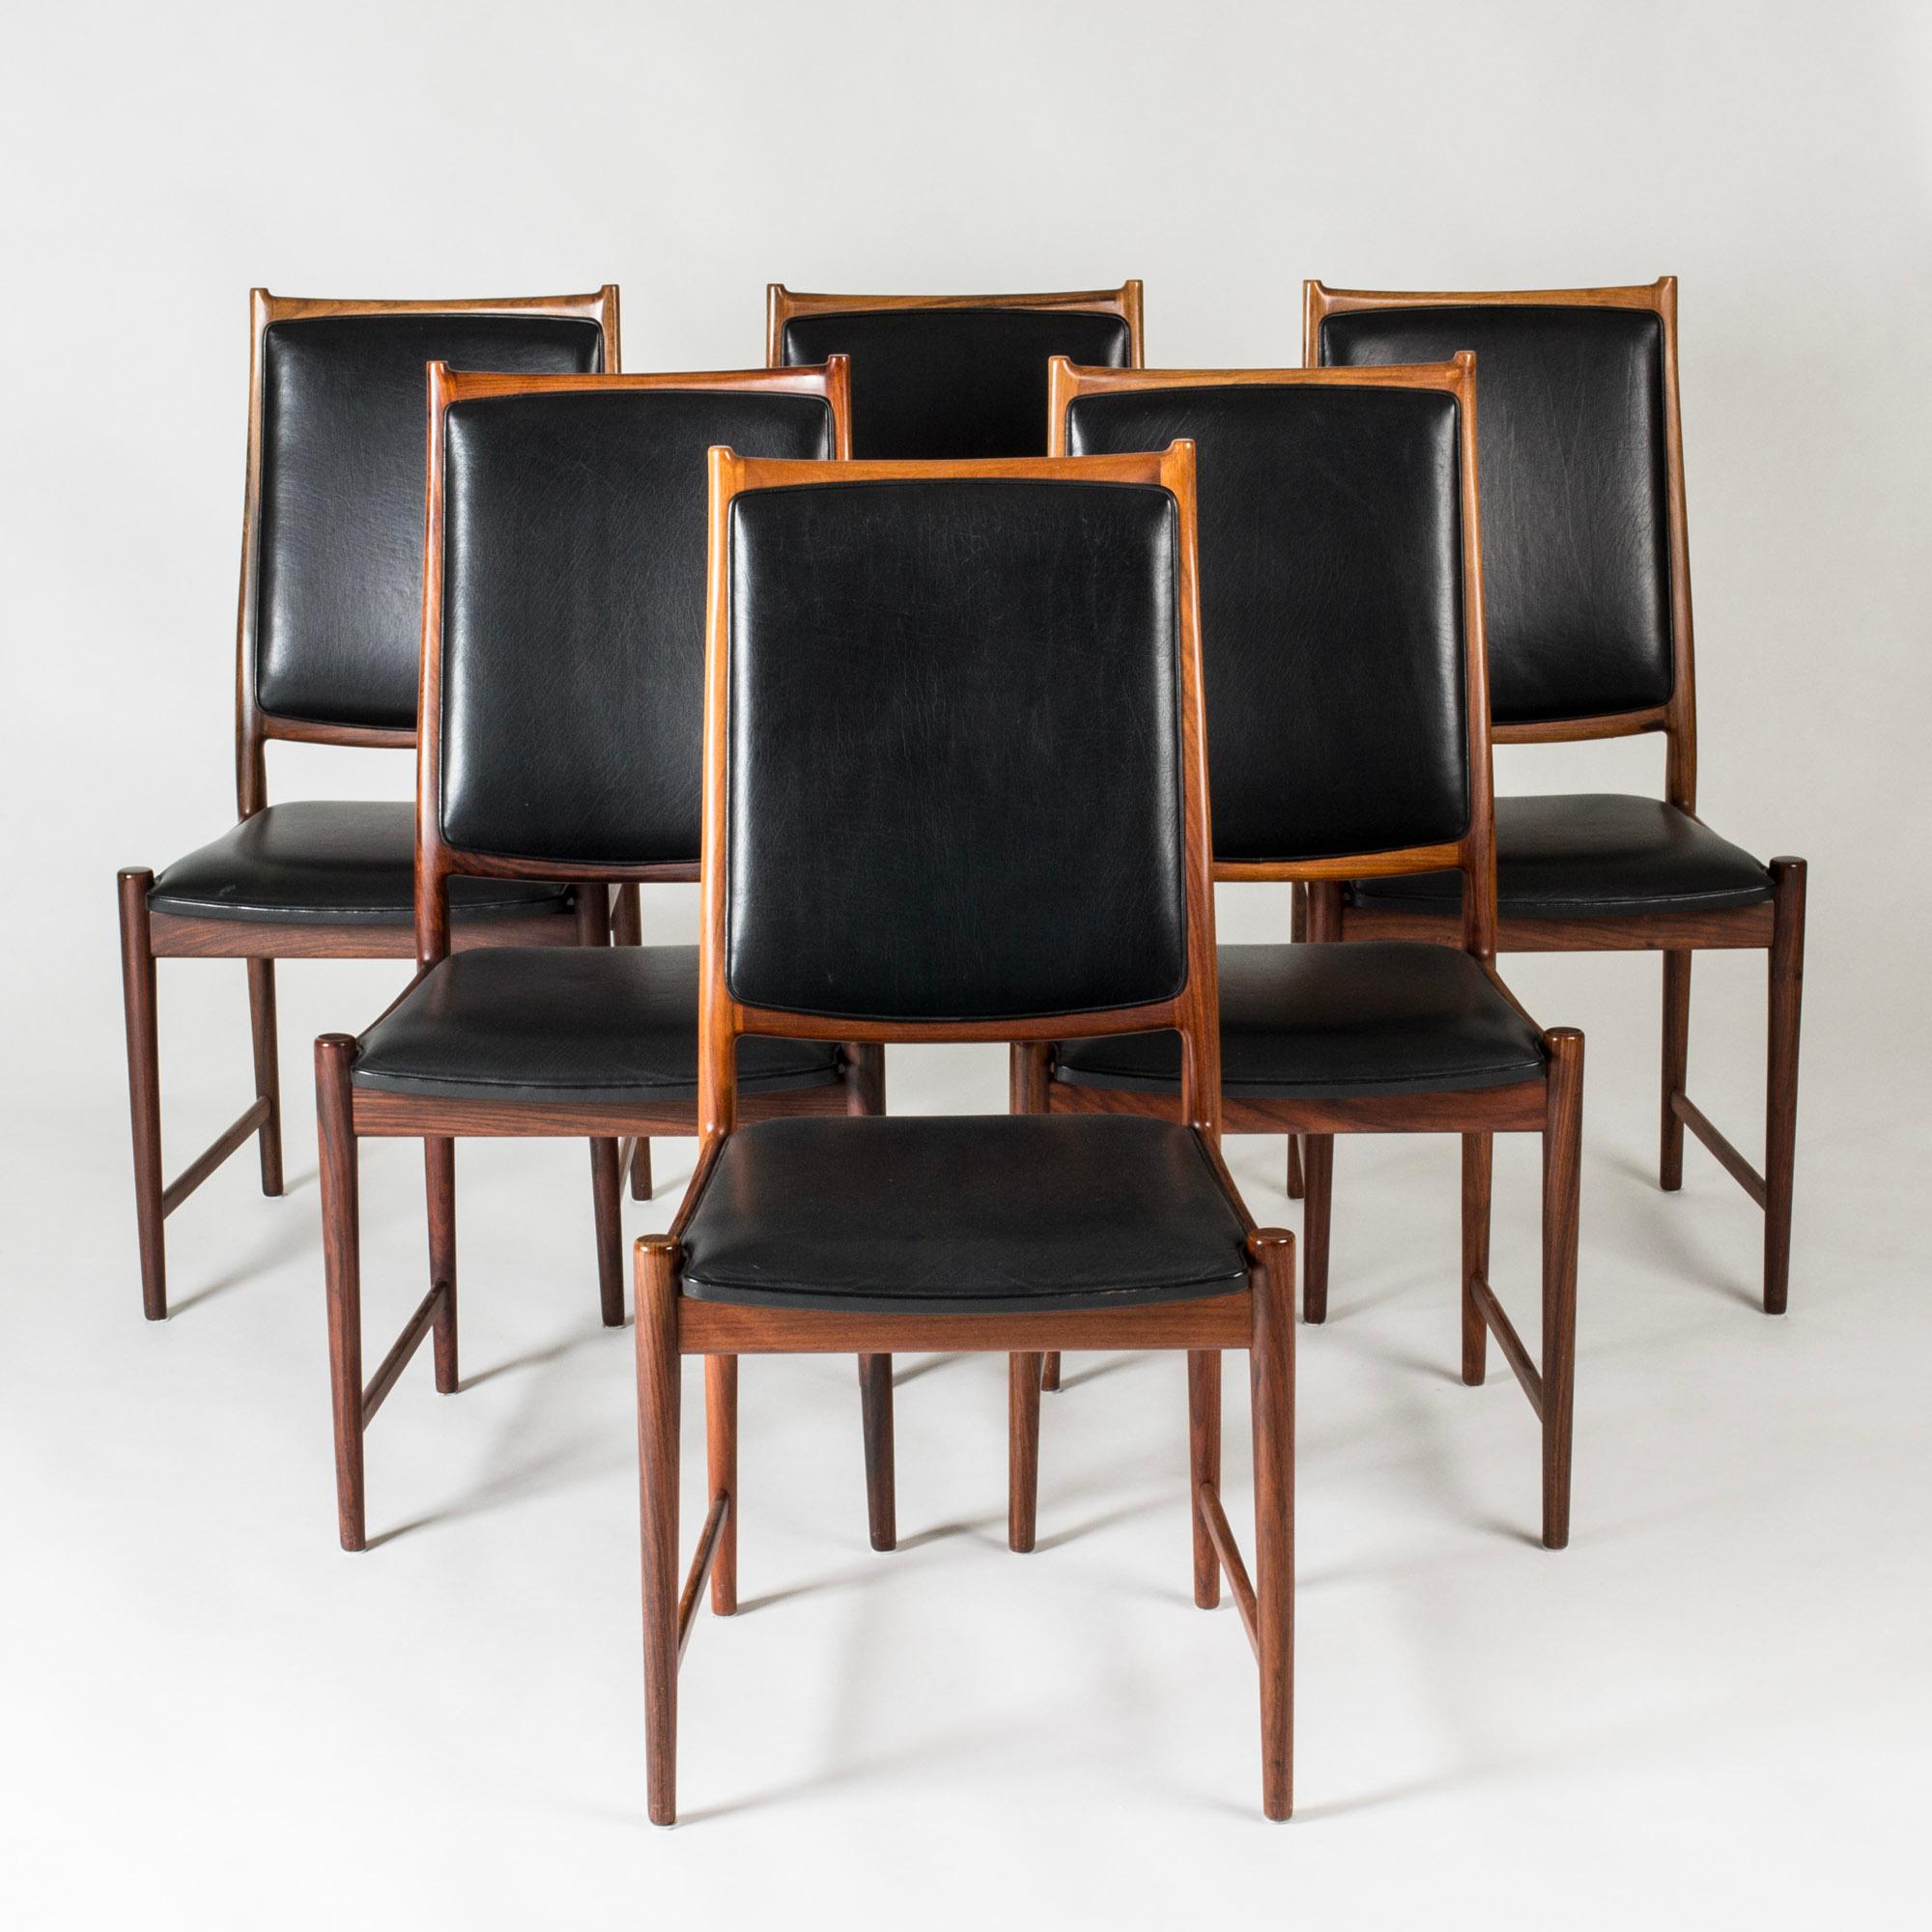 Set of six beautiful dining chairs by Torbjørn Afdal, made from rosewood with lovely rich brown woodgrain. Leather seats and backs, elegantly framed by the wood.